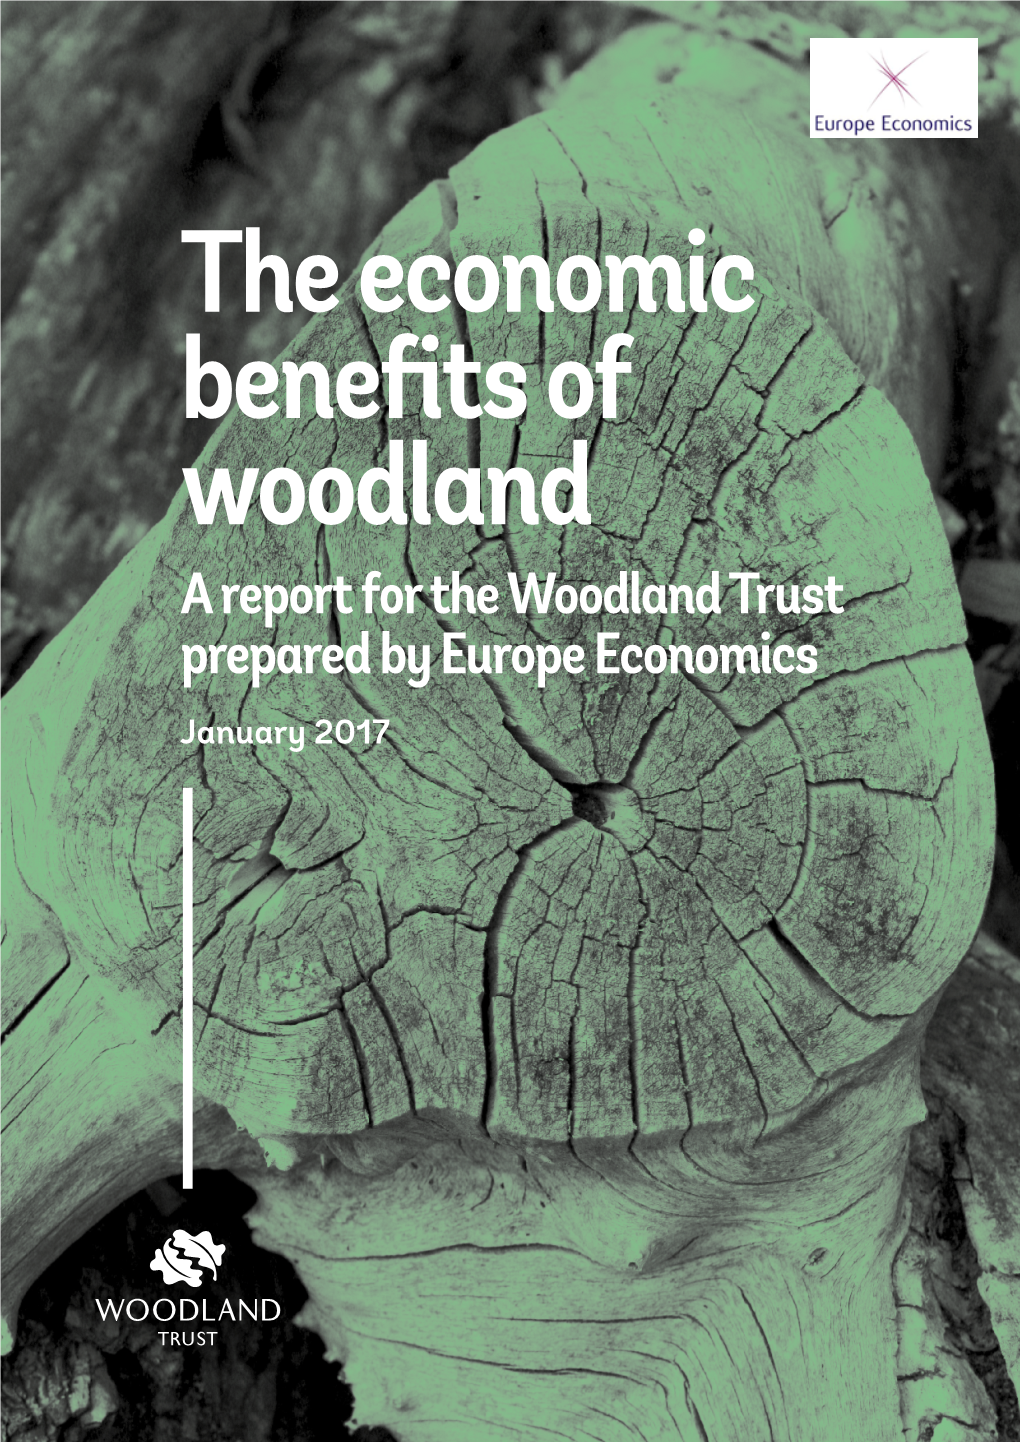 Woodland Actions for Biodiversity and Their Role in Water